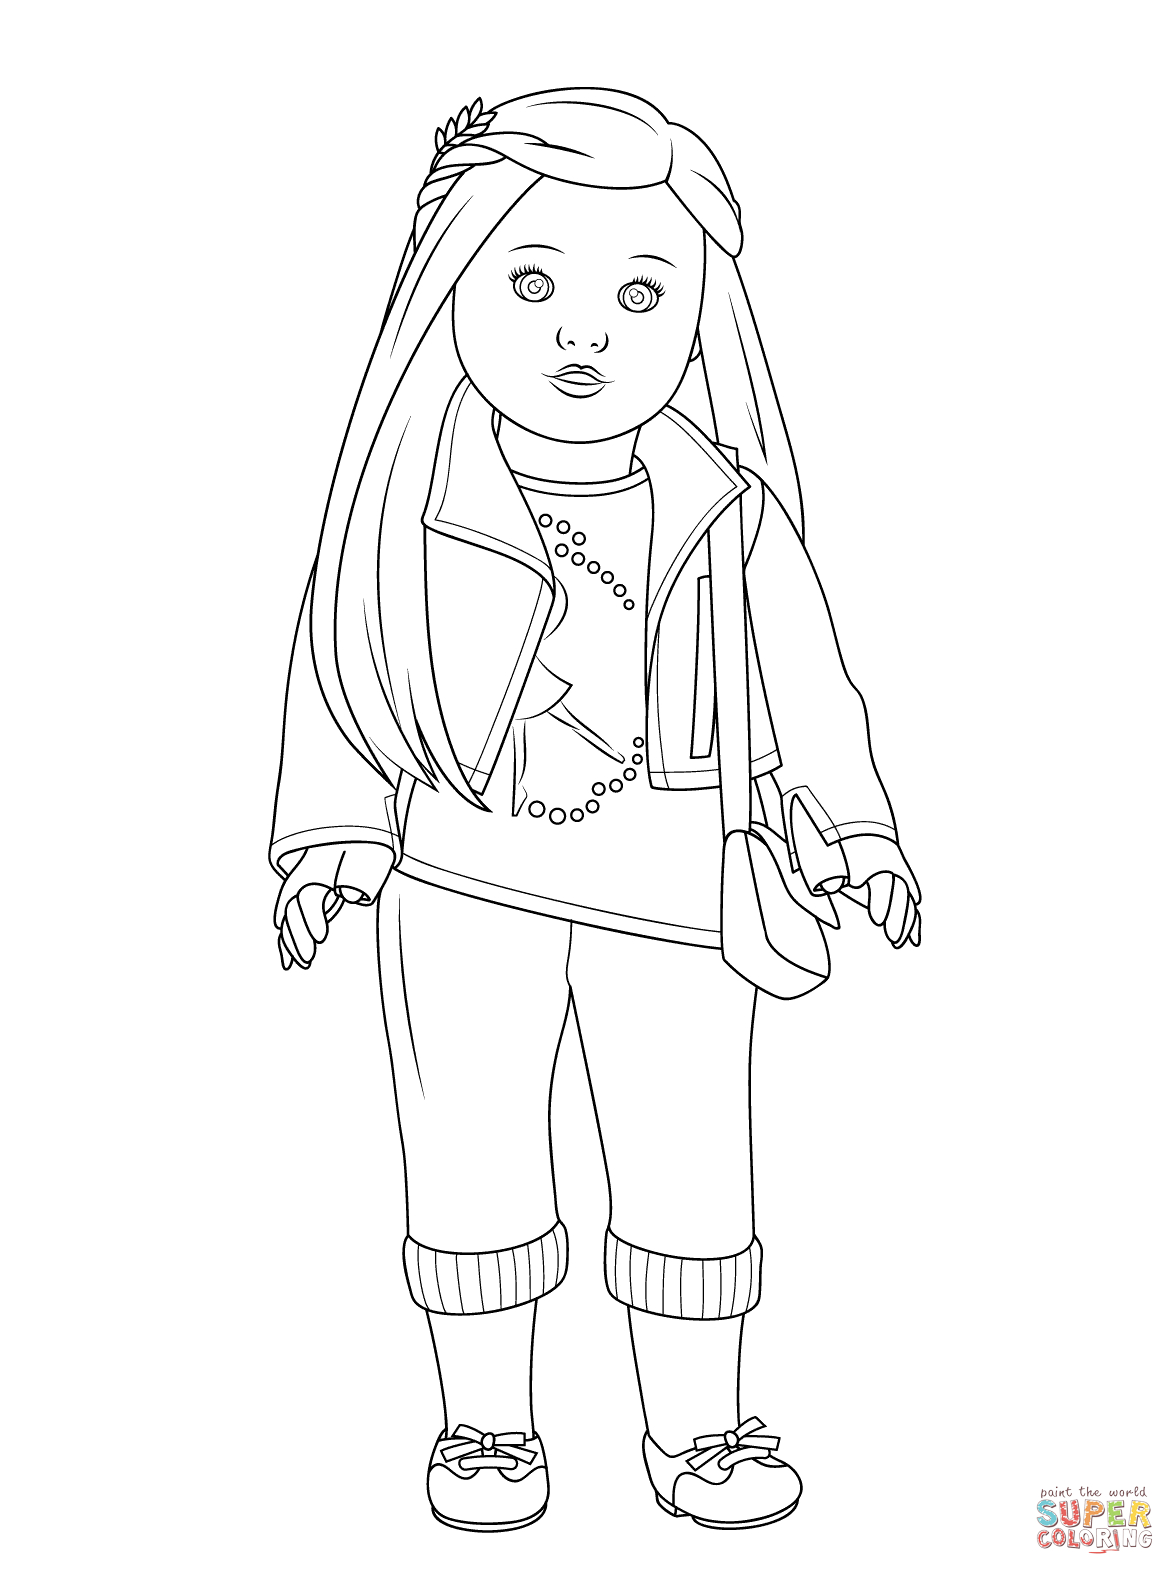 Coloring Page Girl American Girl Isabelle Doll Coloring Page Free Printable Coloring